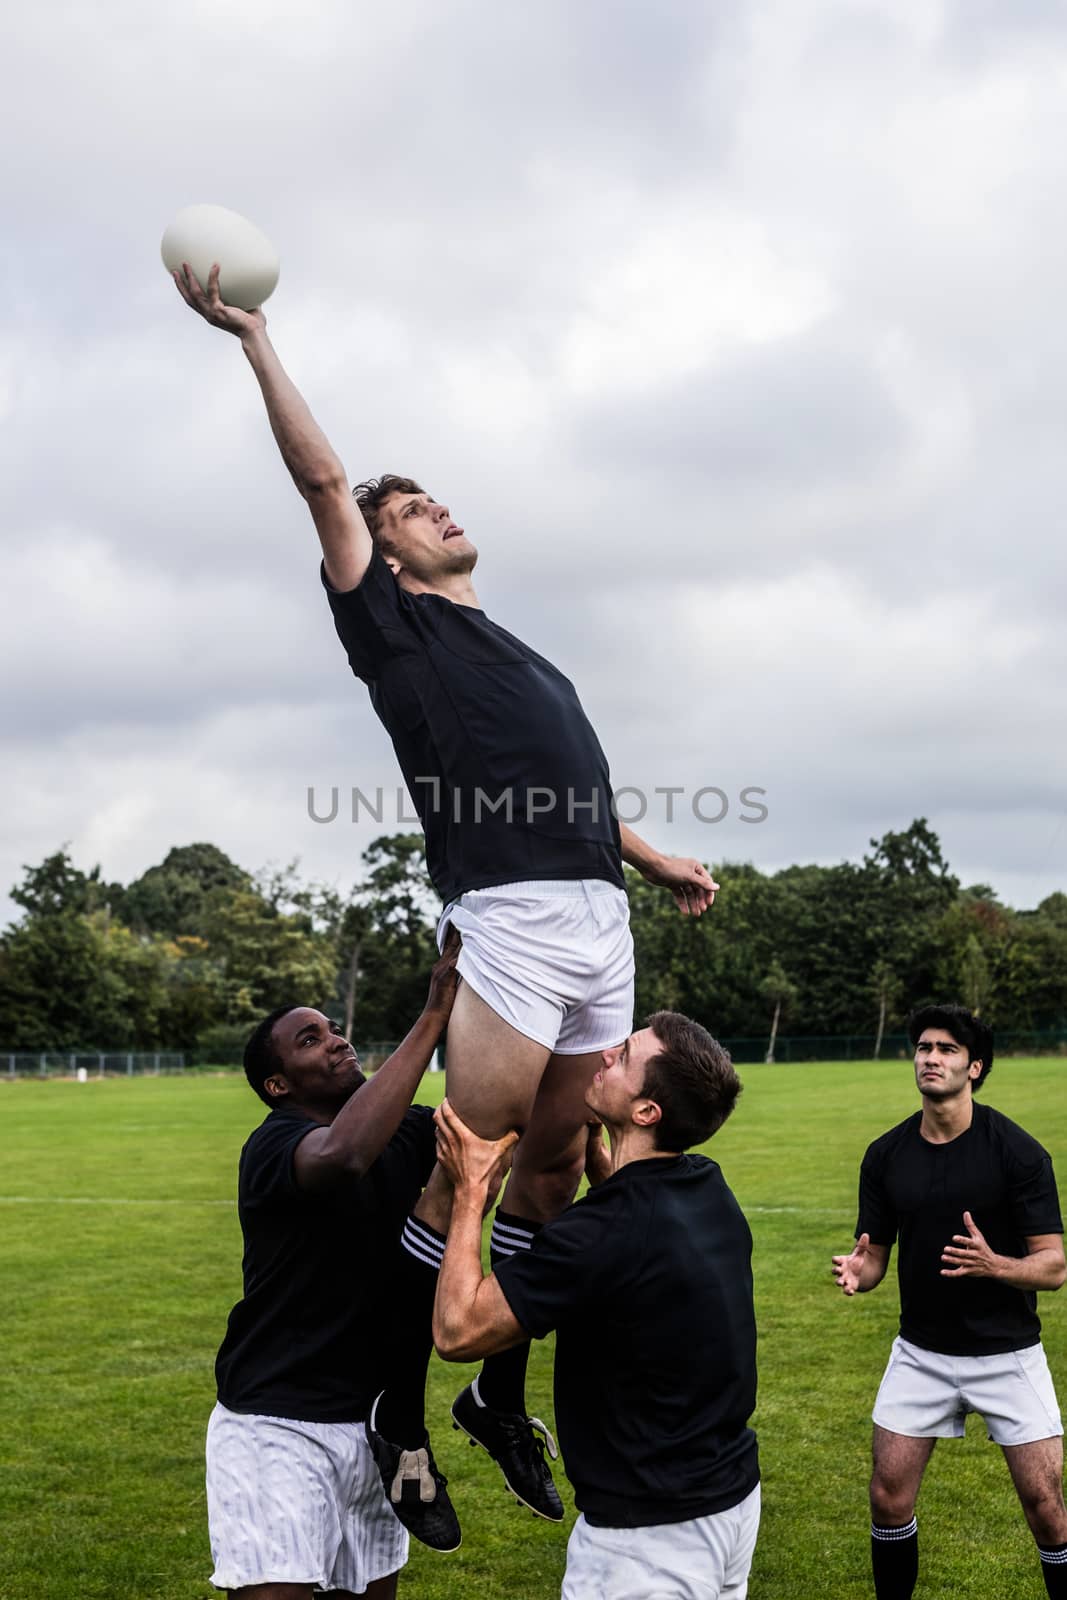 Rugby players jumping for line out by Wavebreakmedia